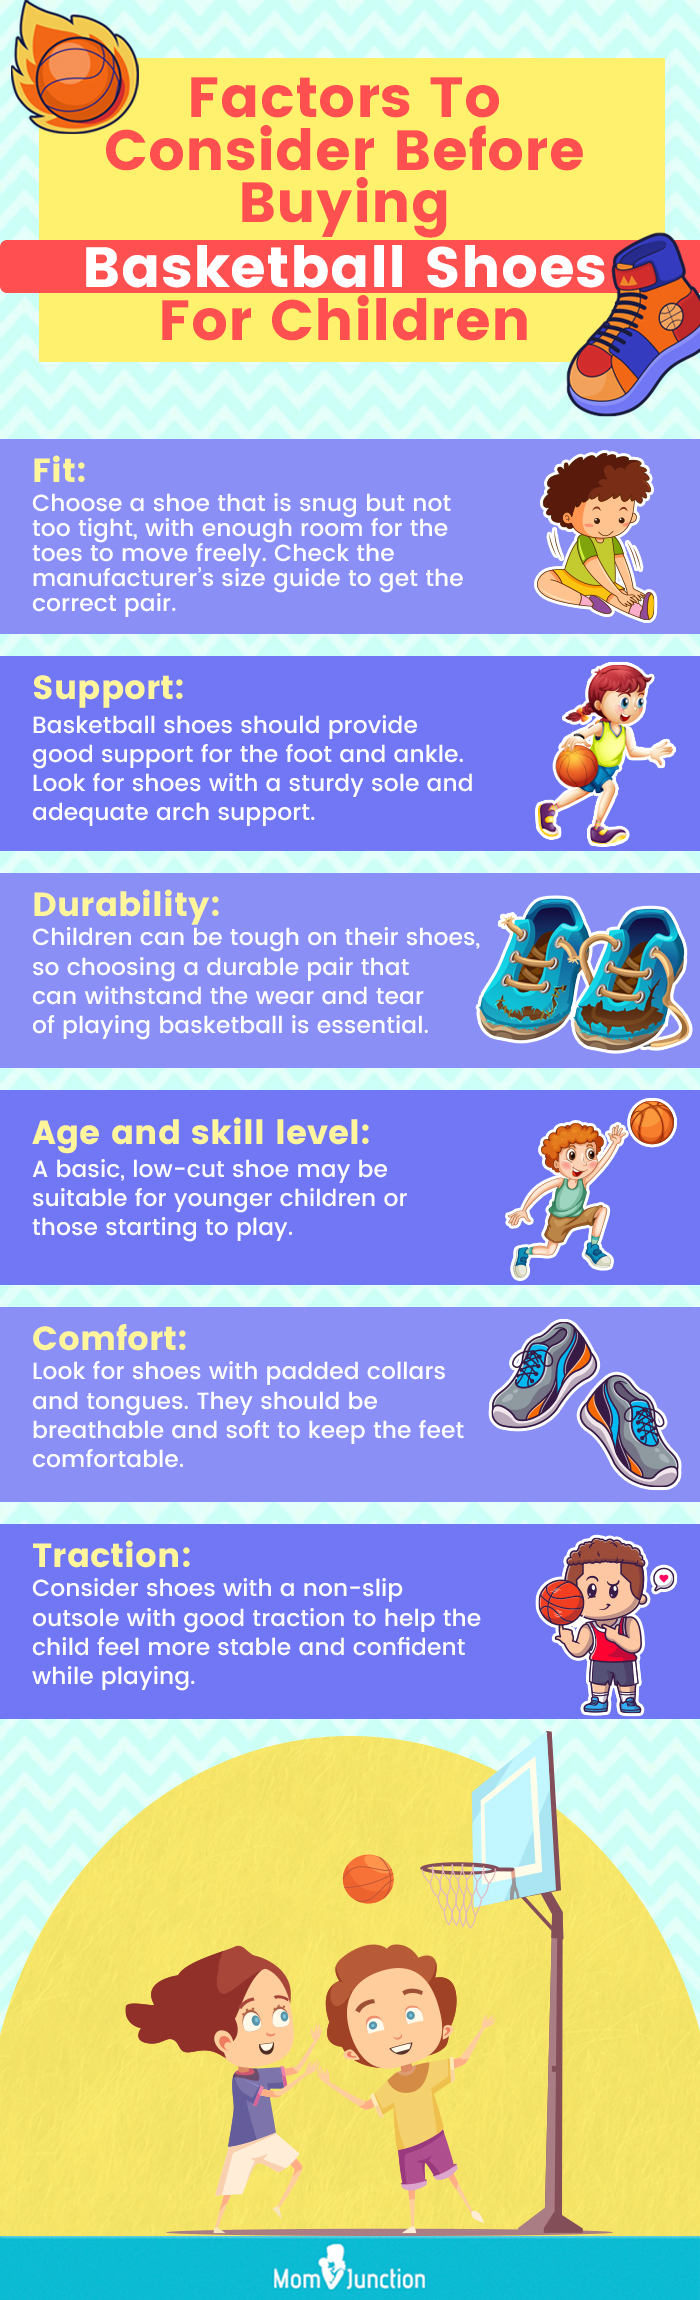 Factors To Consider Before Buying Basketball Shoes For Children